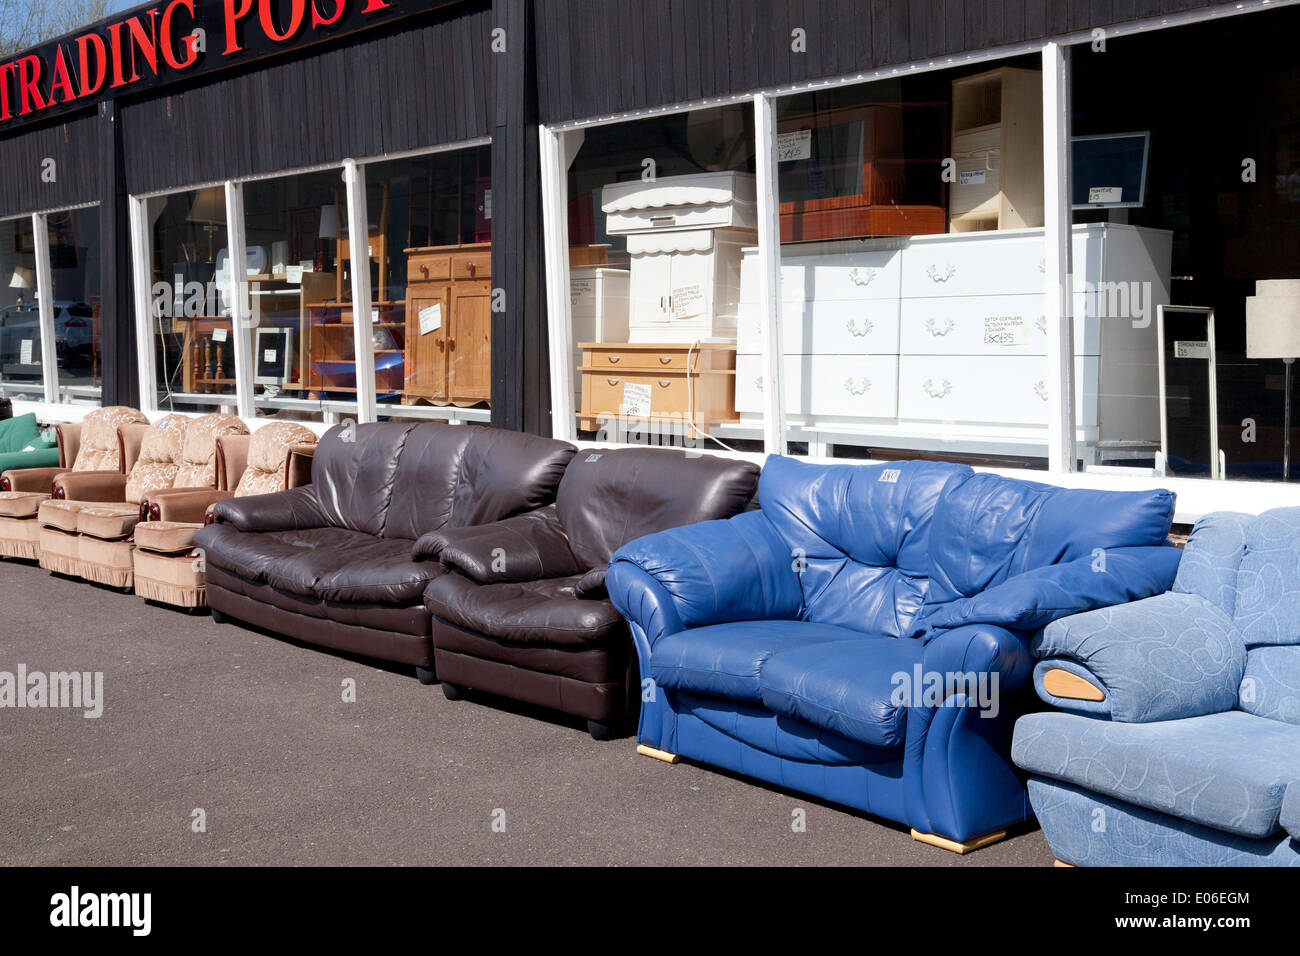 Secondhand Sofas For Sale Outside The Trading Post Sowerby Bridge